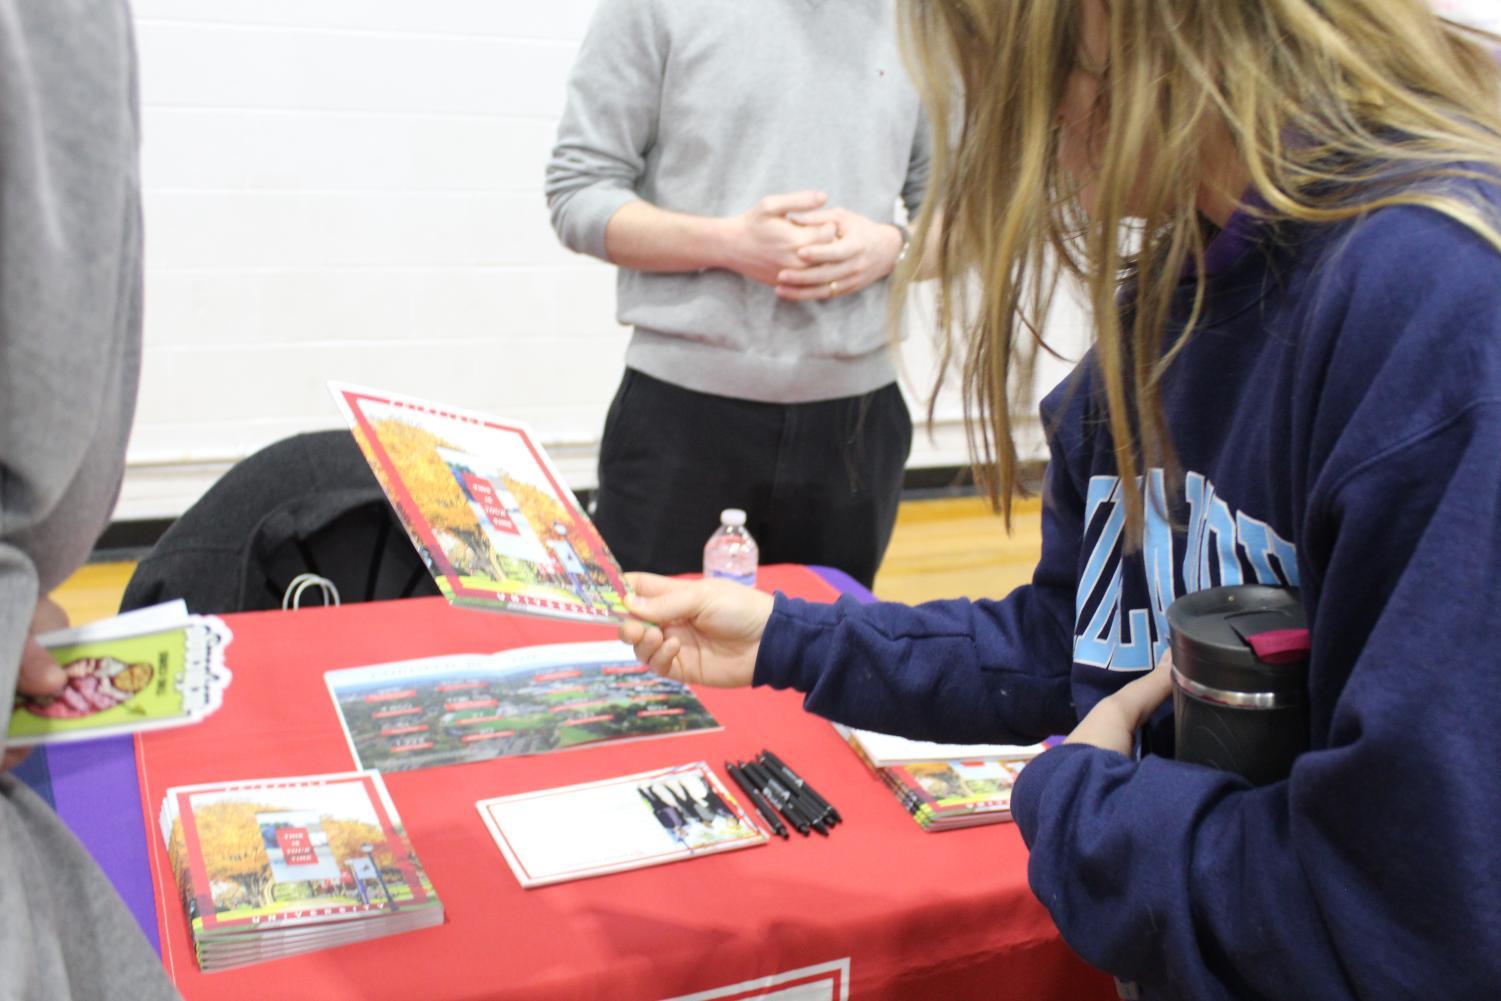 Senior Emma Gomes sifts through school pamphlets at the college fair.